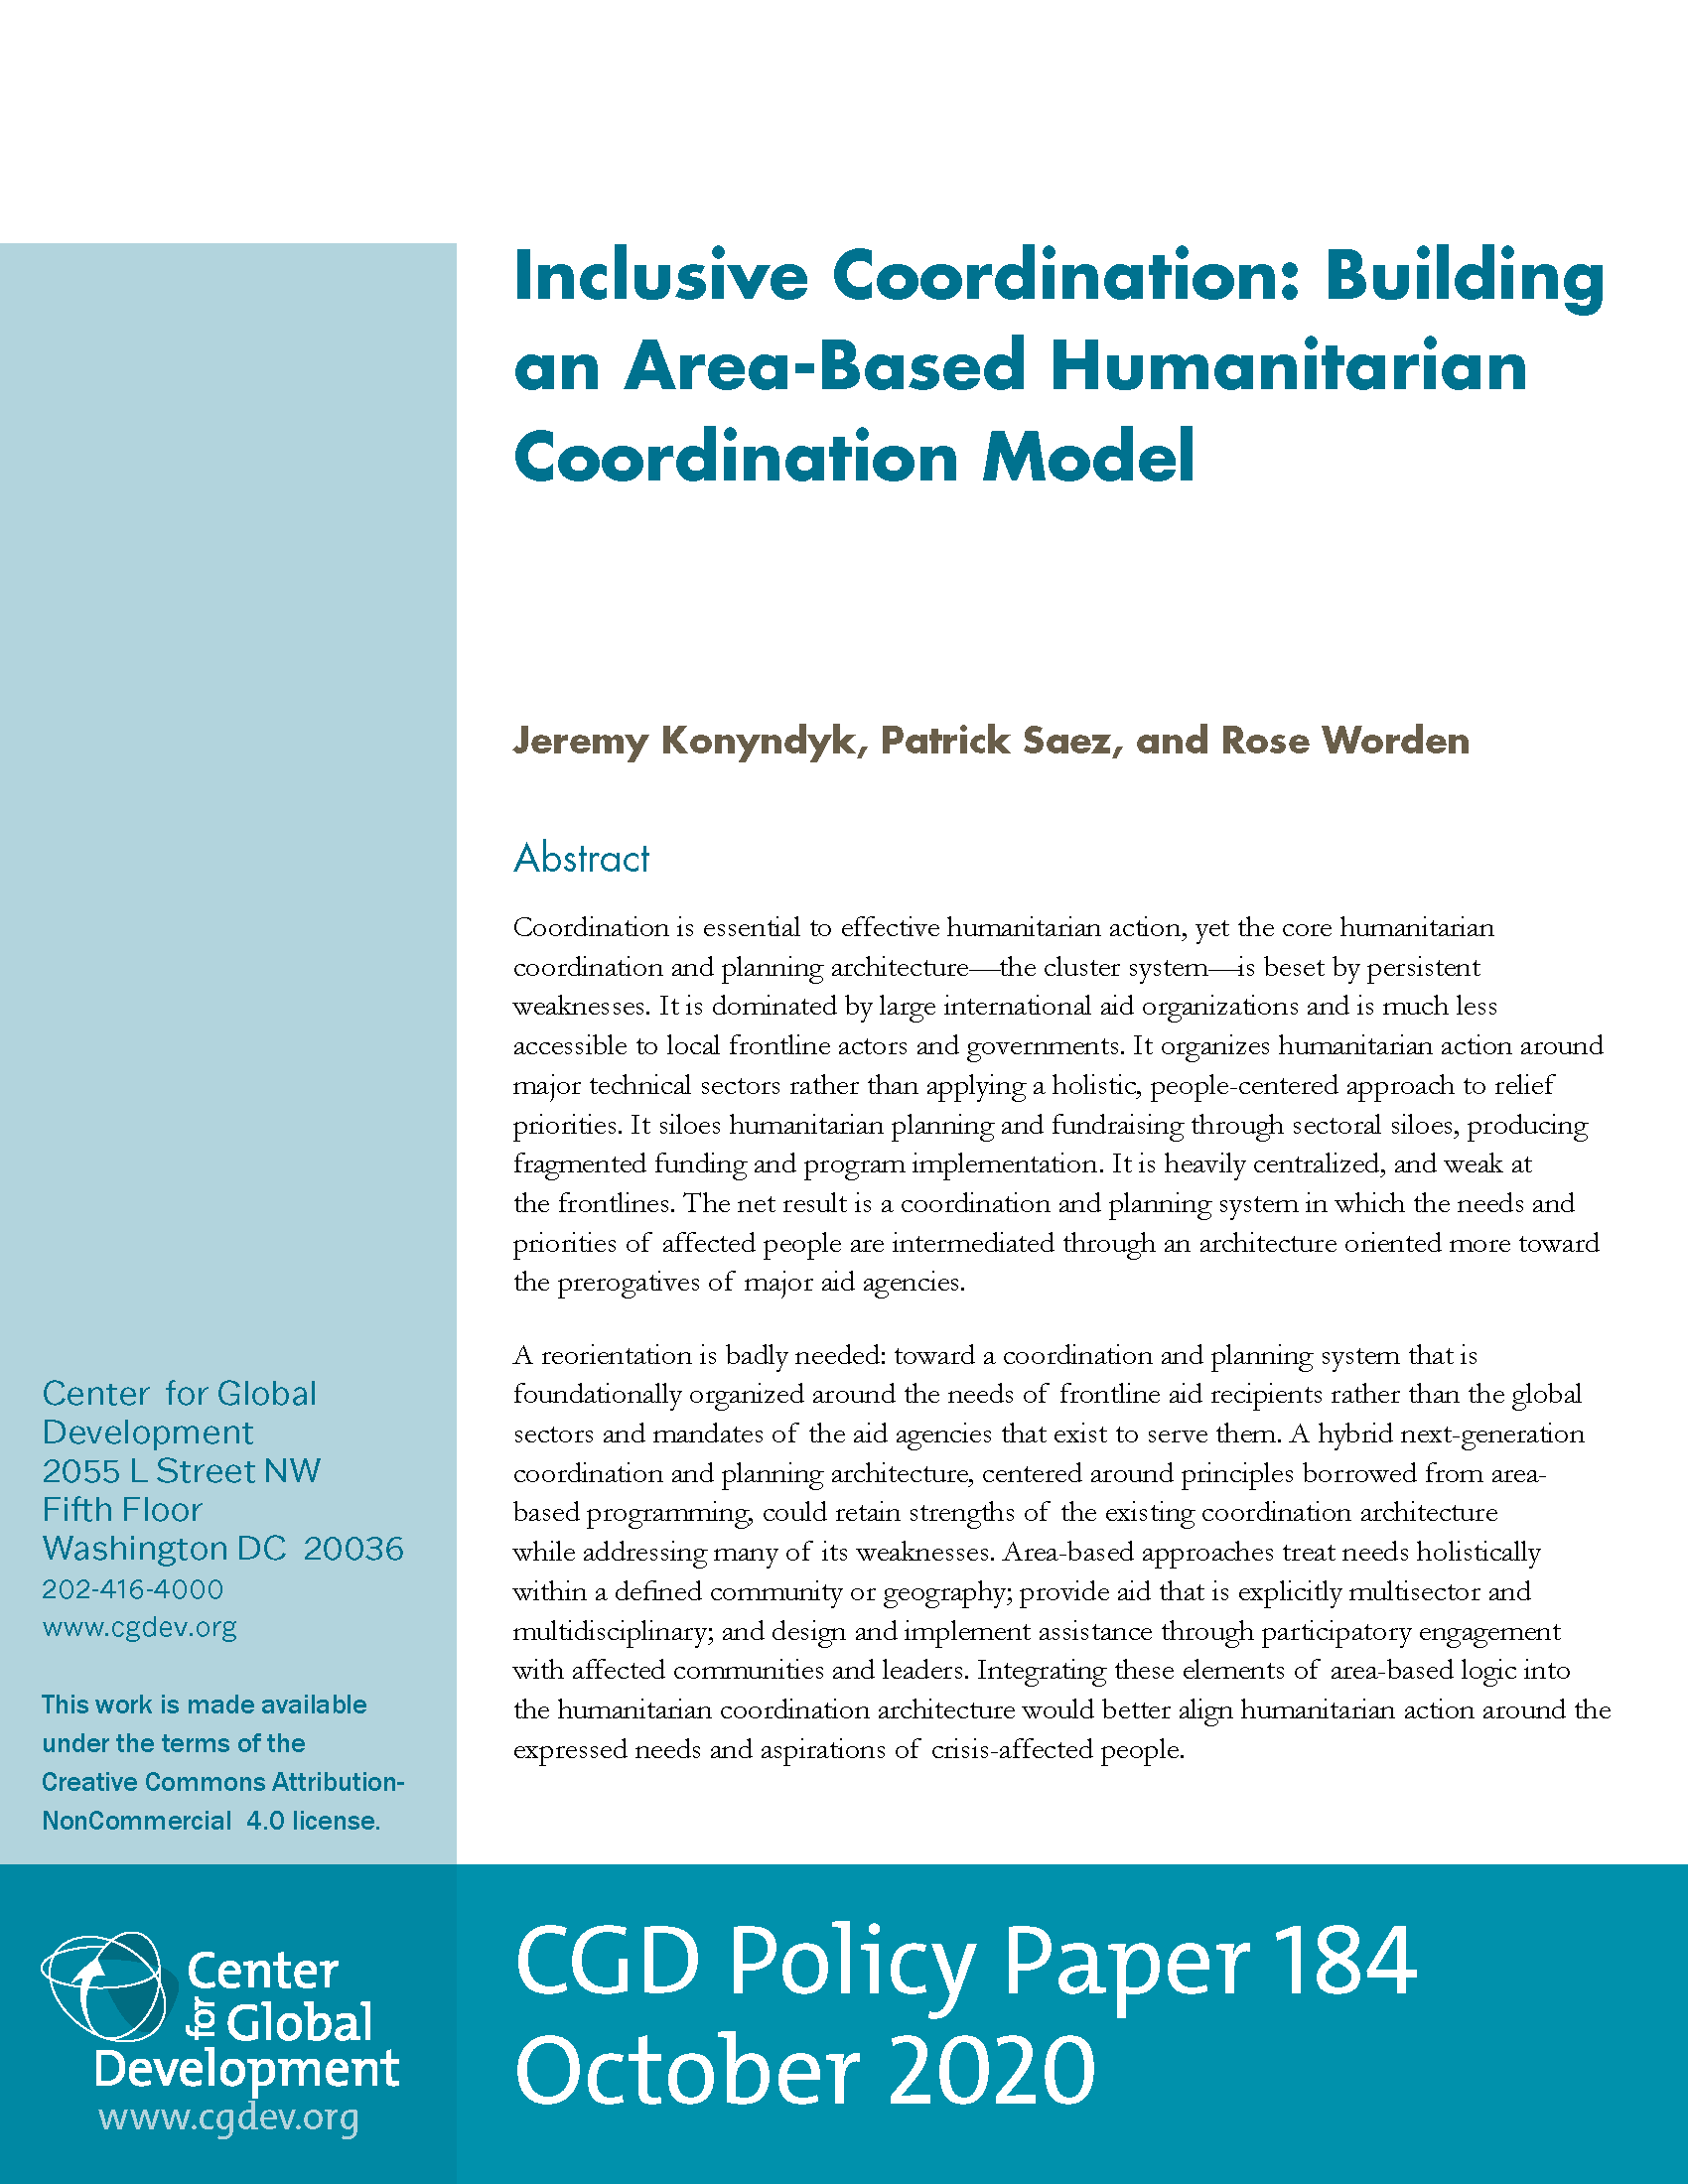 Cover page for Inclusive Coordination: Building an Area-Based Humanitarian Coordination Model